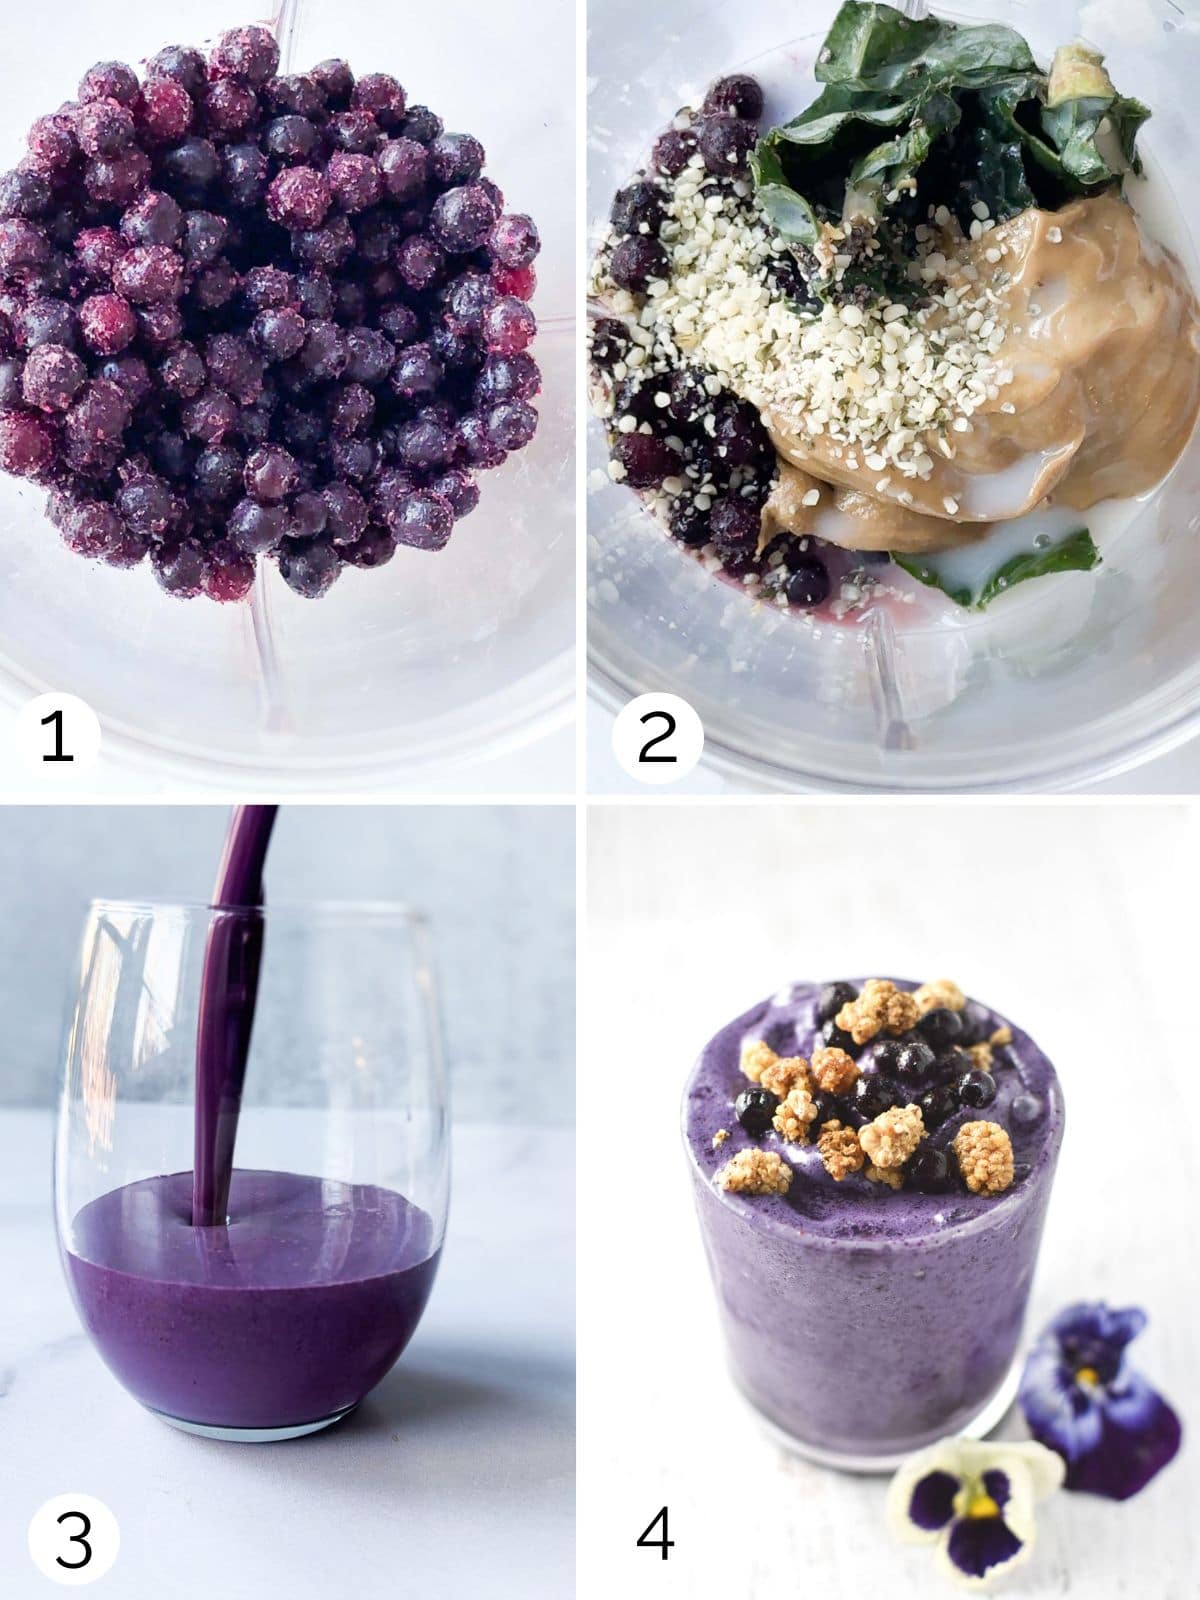 How to make a healthy blueberry smoothie steps.